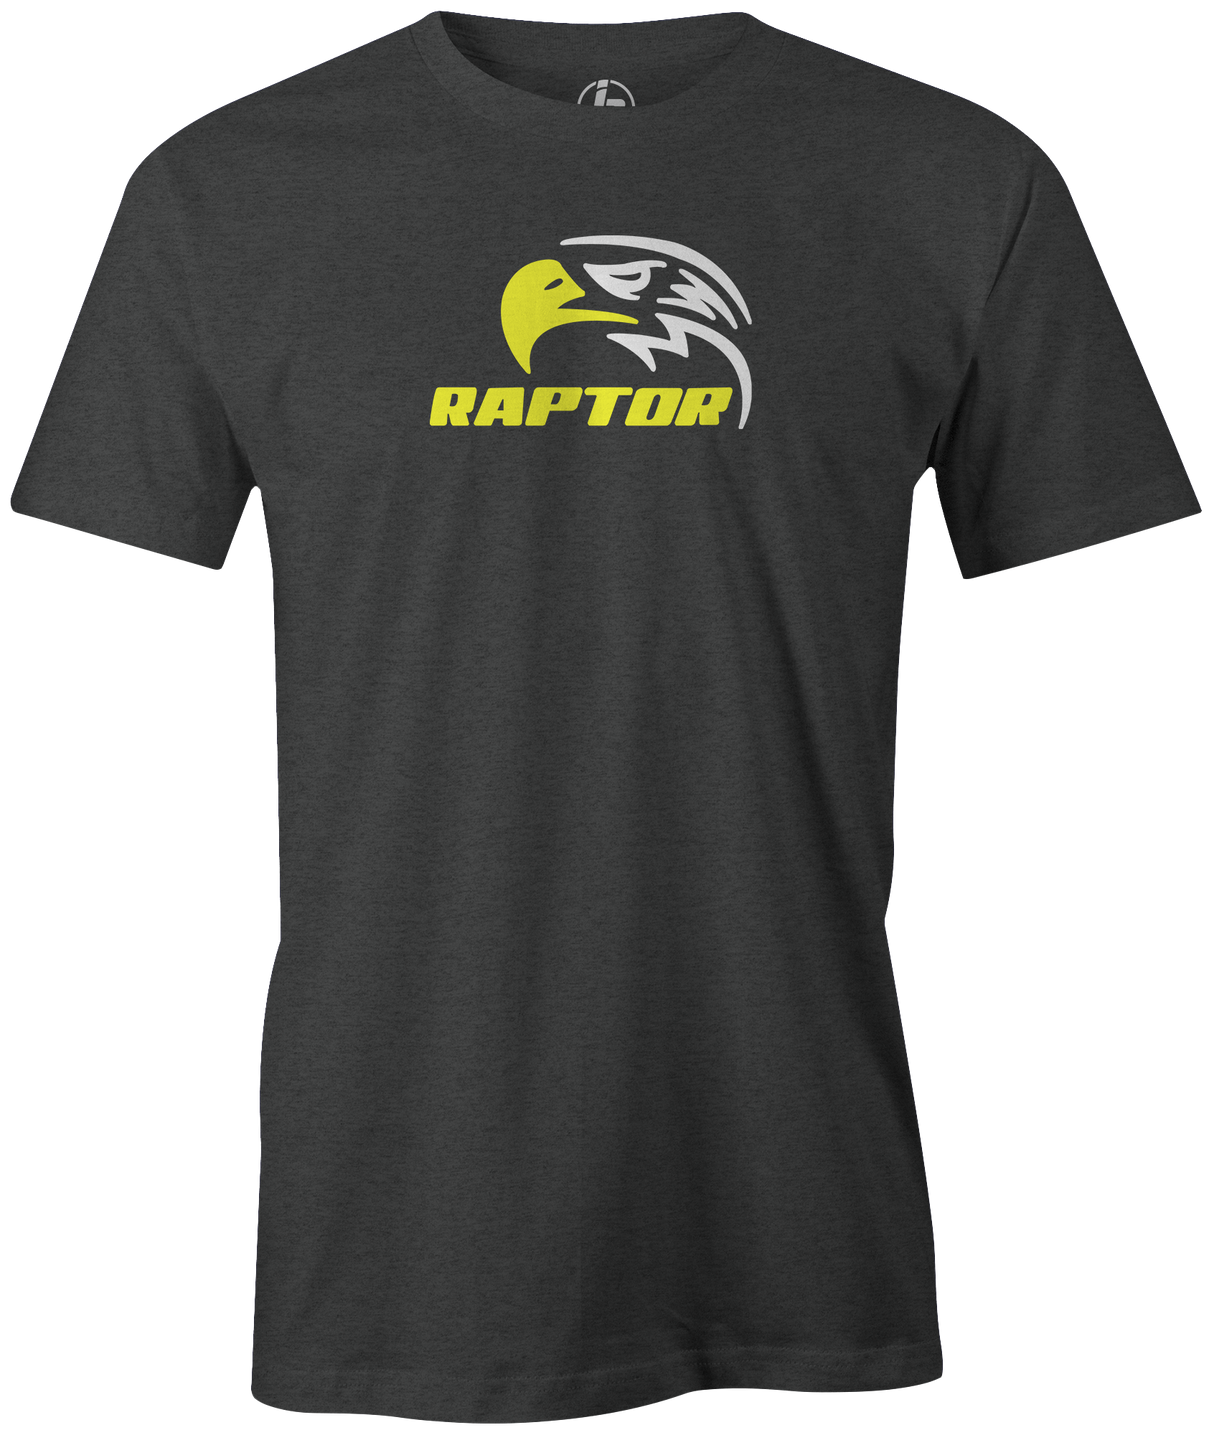 This shirt features the new Sky Raptor bowling ball logo found on Motiv Bowling's newest release. Available in Charcoal, Blue, and Navy.  T-shirts tee shirts bowling shirt jersey league tournament pba ej tackett. a great practice shirt when you hit the lanes! Aj johnson, Dick Allen, THB